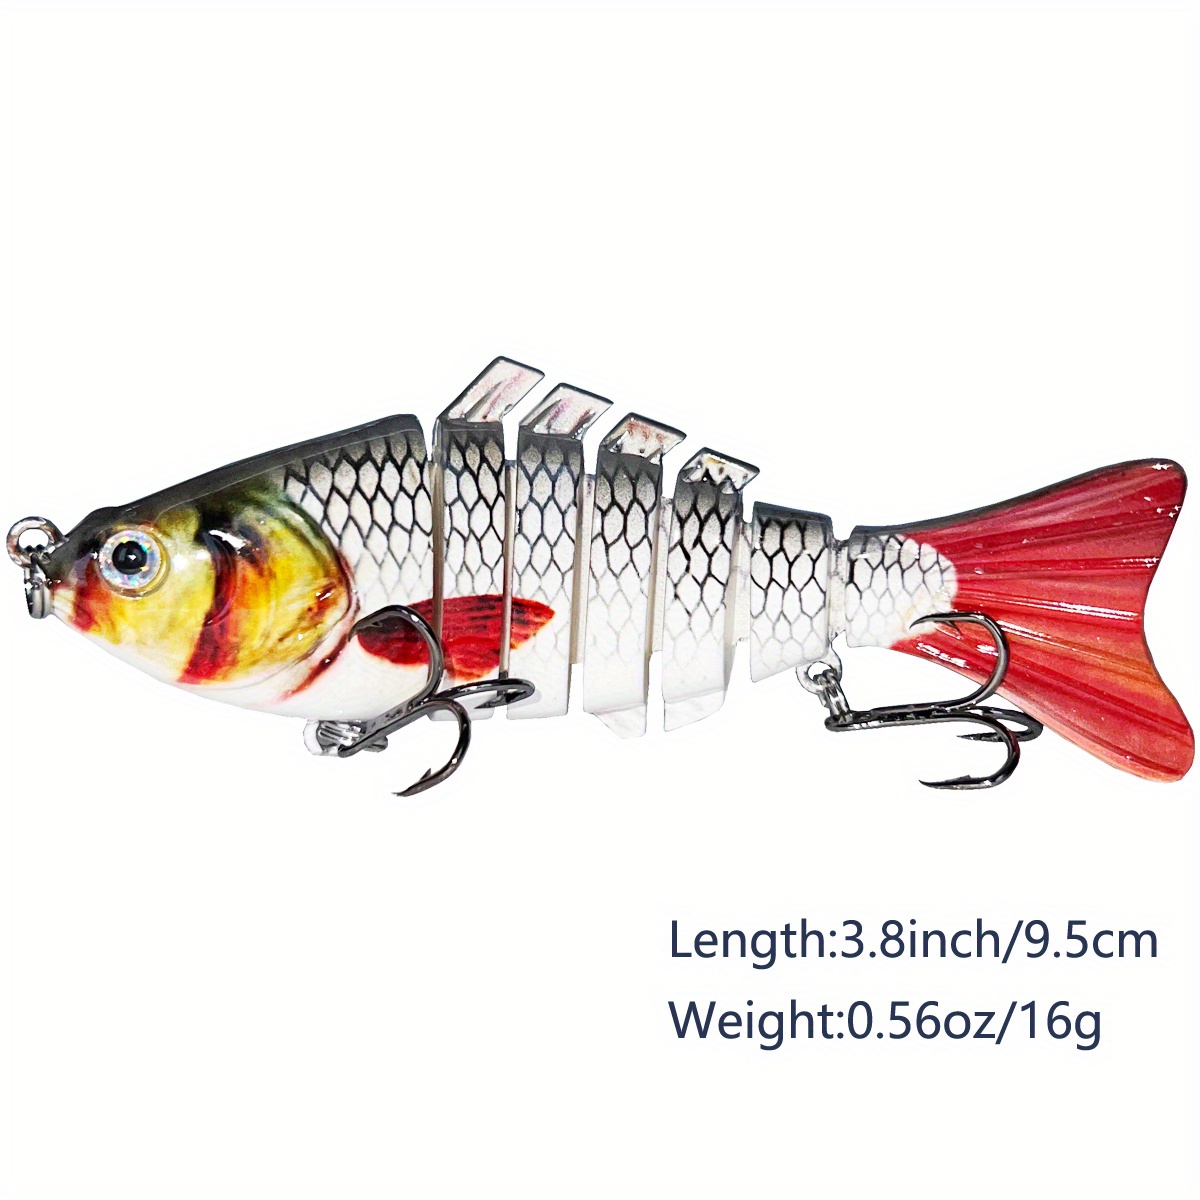  TAOXIXI Fishing Lures for Bass Multi Jointed